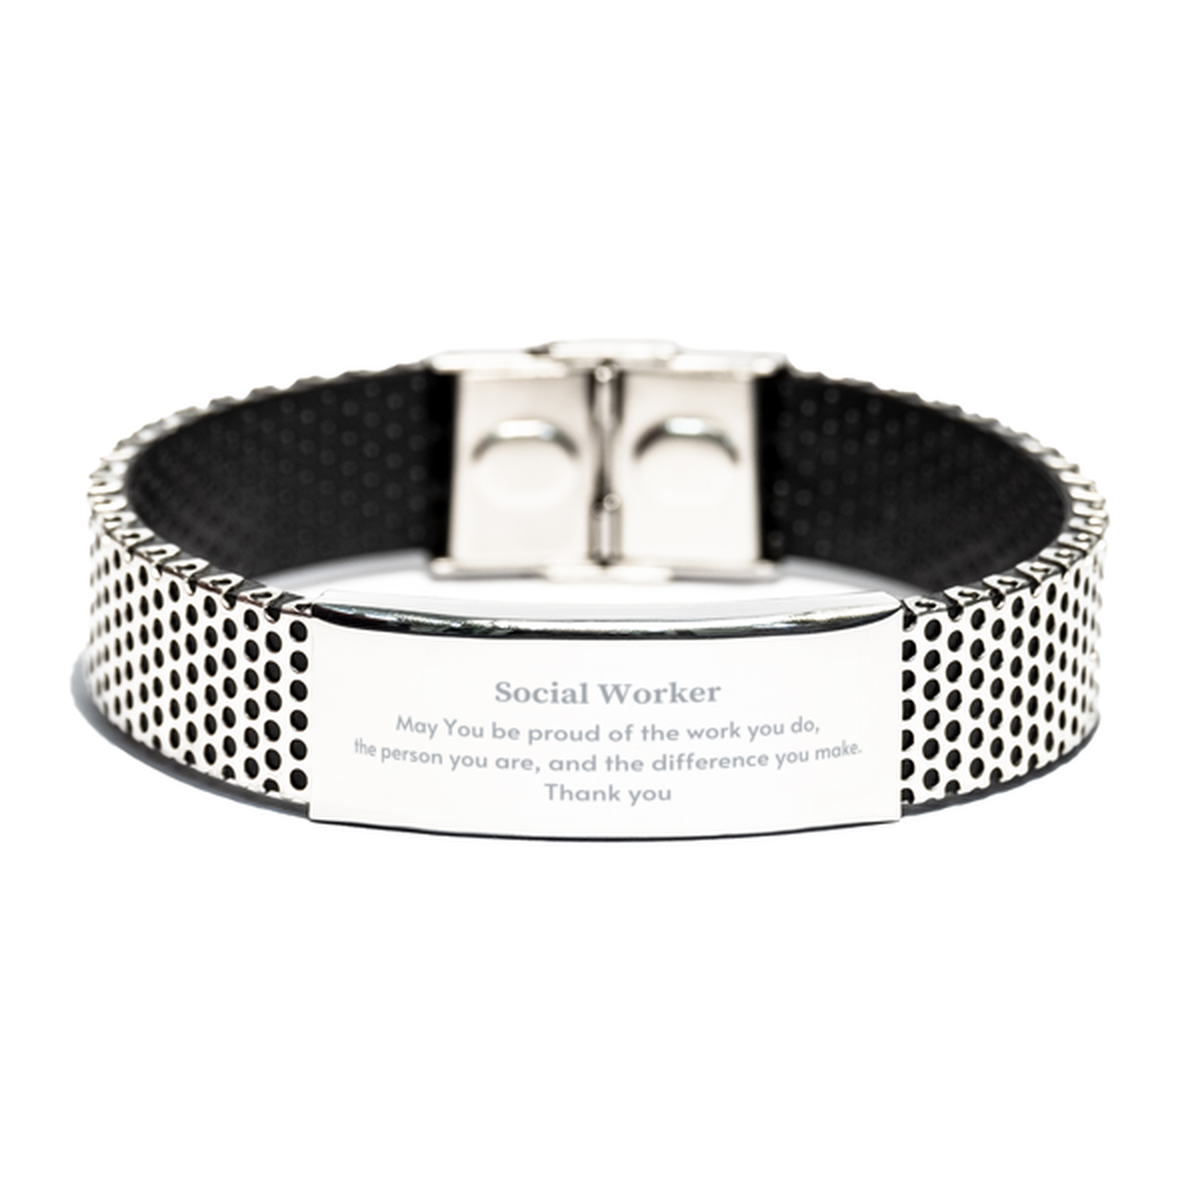 Heartwarming Stainless Steel Bracelet Retirement Coworkers Gifts for Social Worker, Social Worker May You be proud of the work you do, the person you are Gifts for Boss Men Women Friends